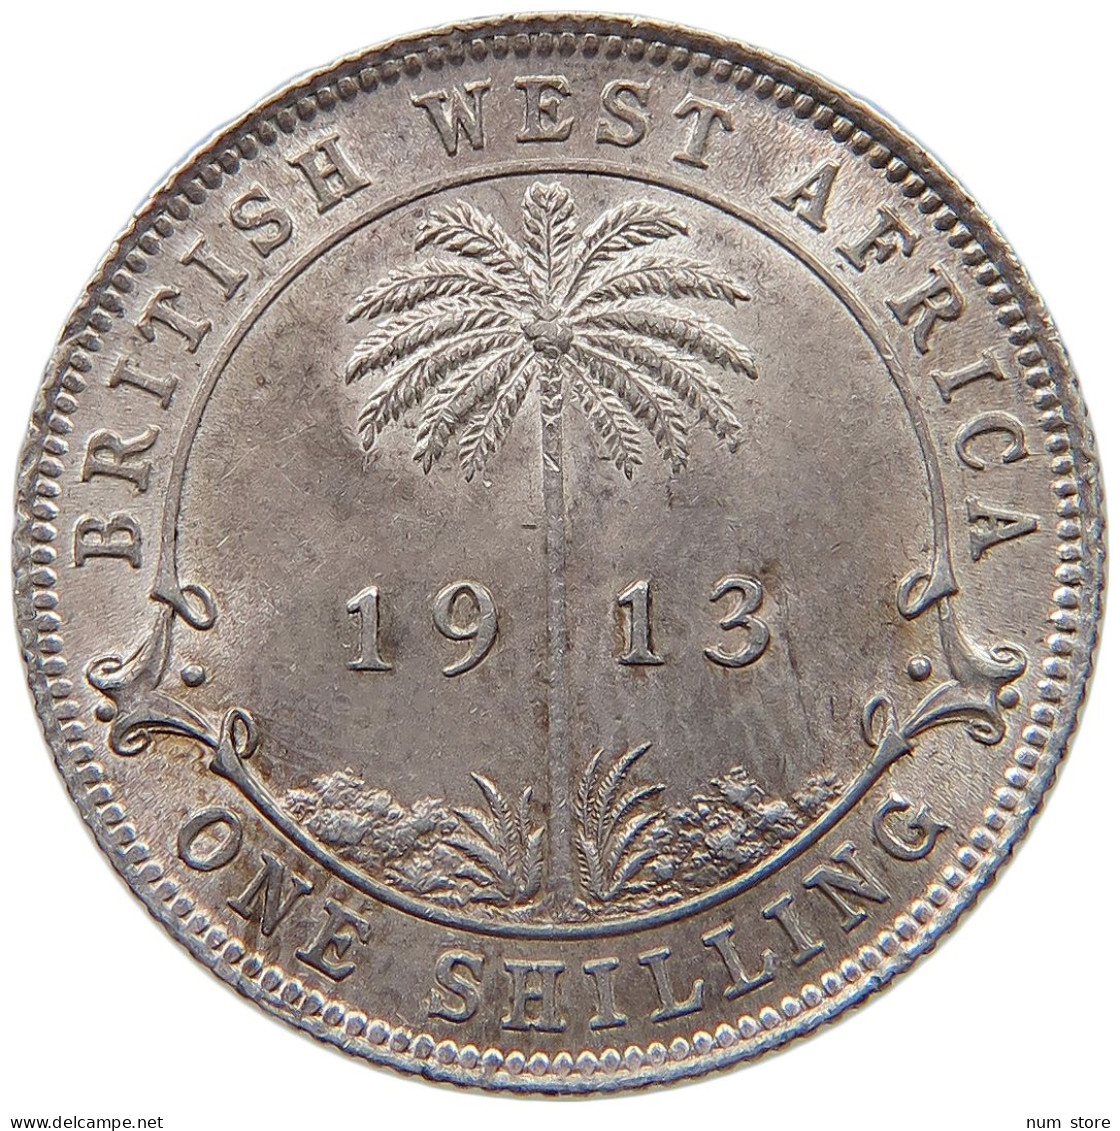 WEST AFRICA SHILLING 1913 George V. (1910-1936) #t111 1123 - Collections